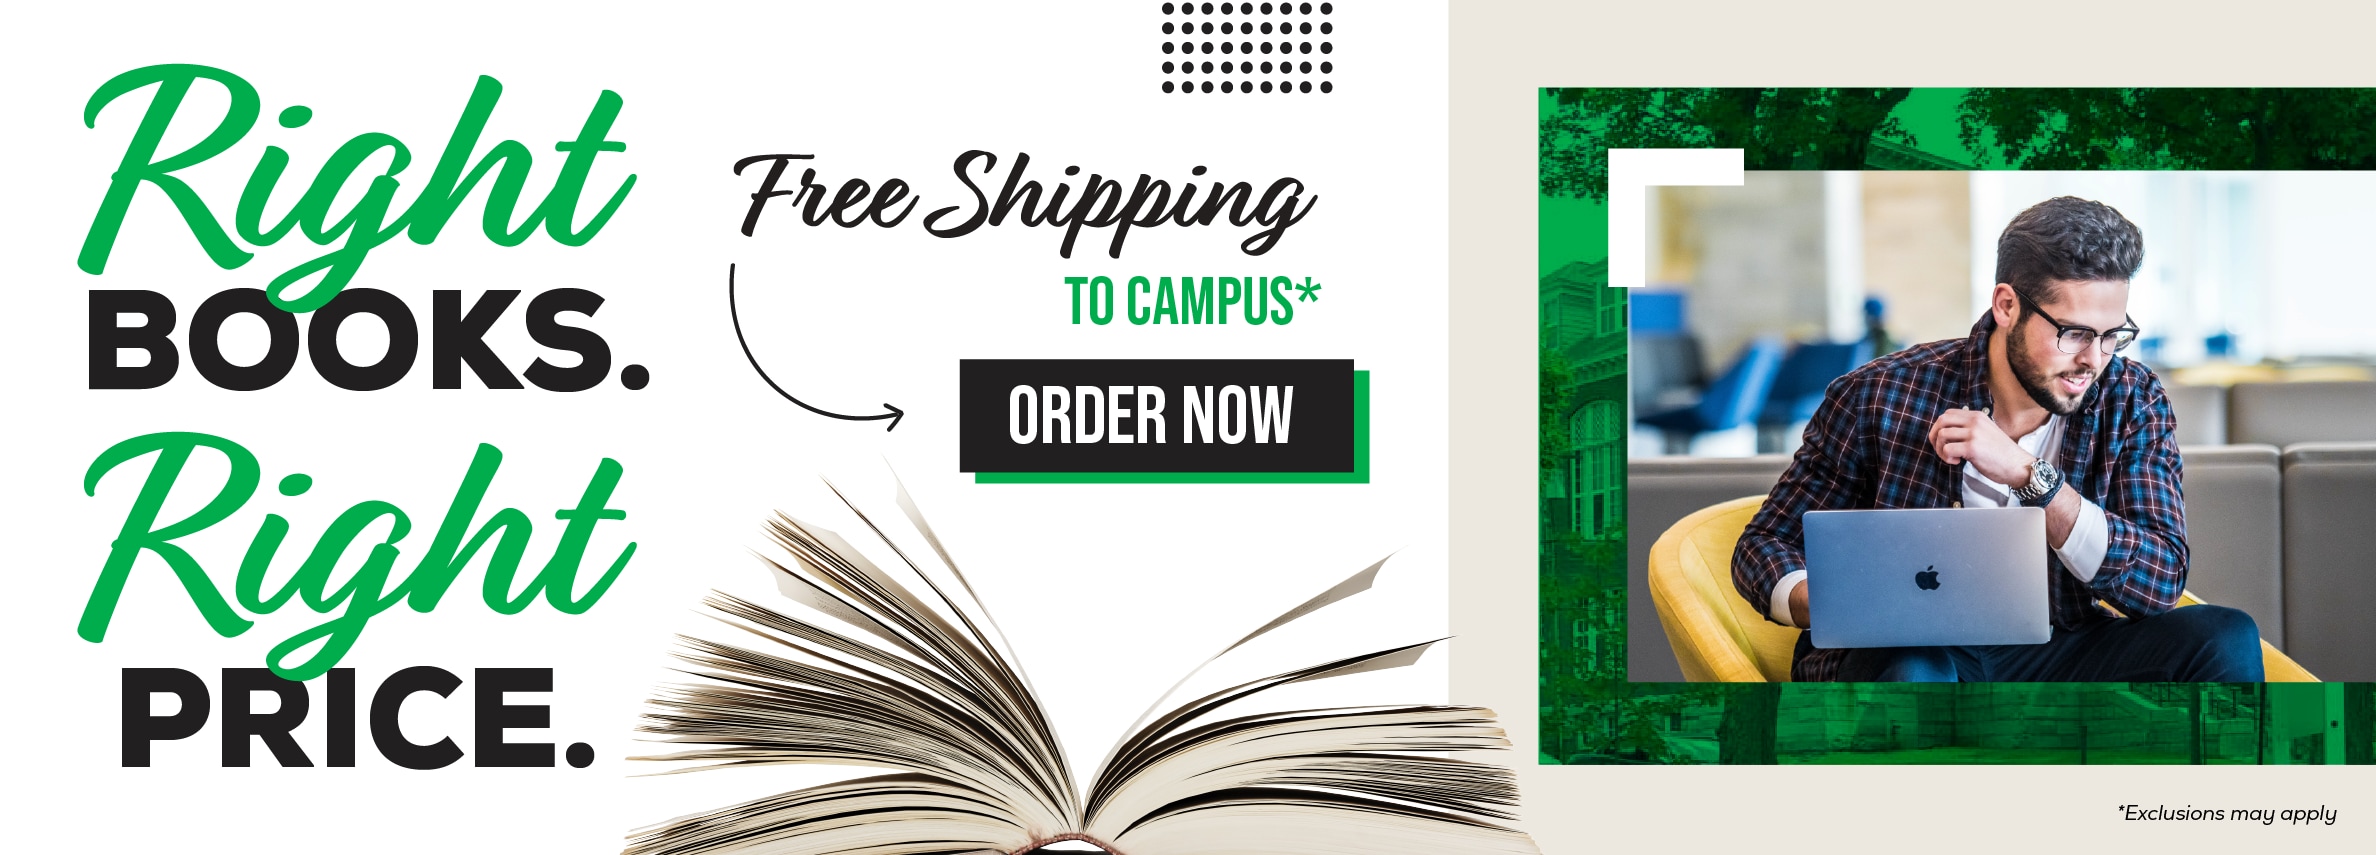 Right books. Right price. Free shipping to campus.* Order now. *Exclusions may apply.